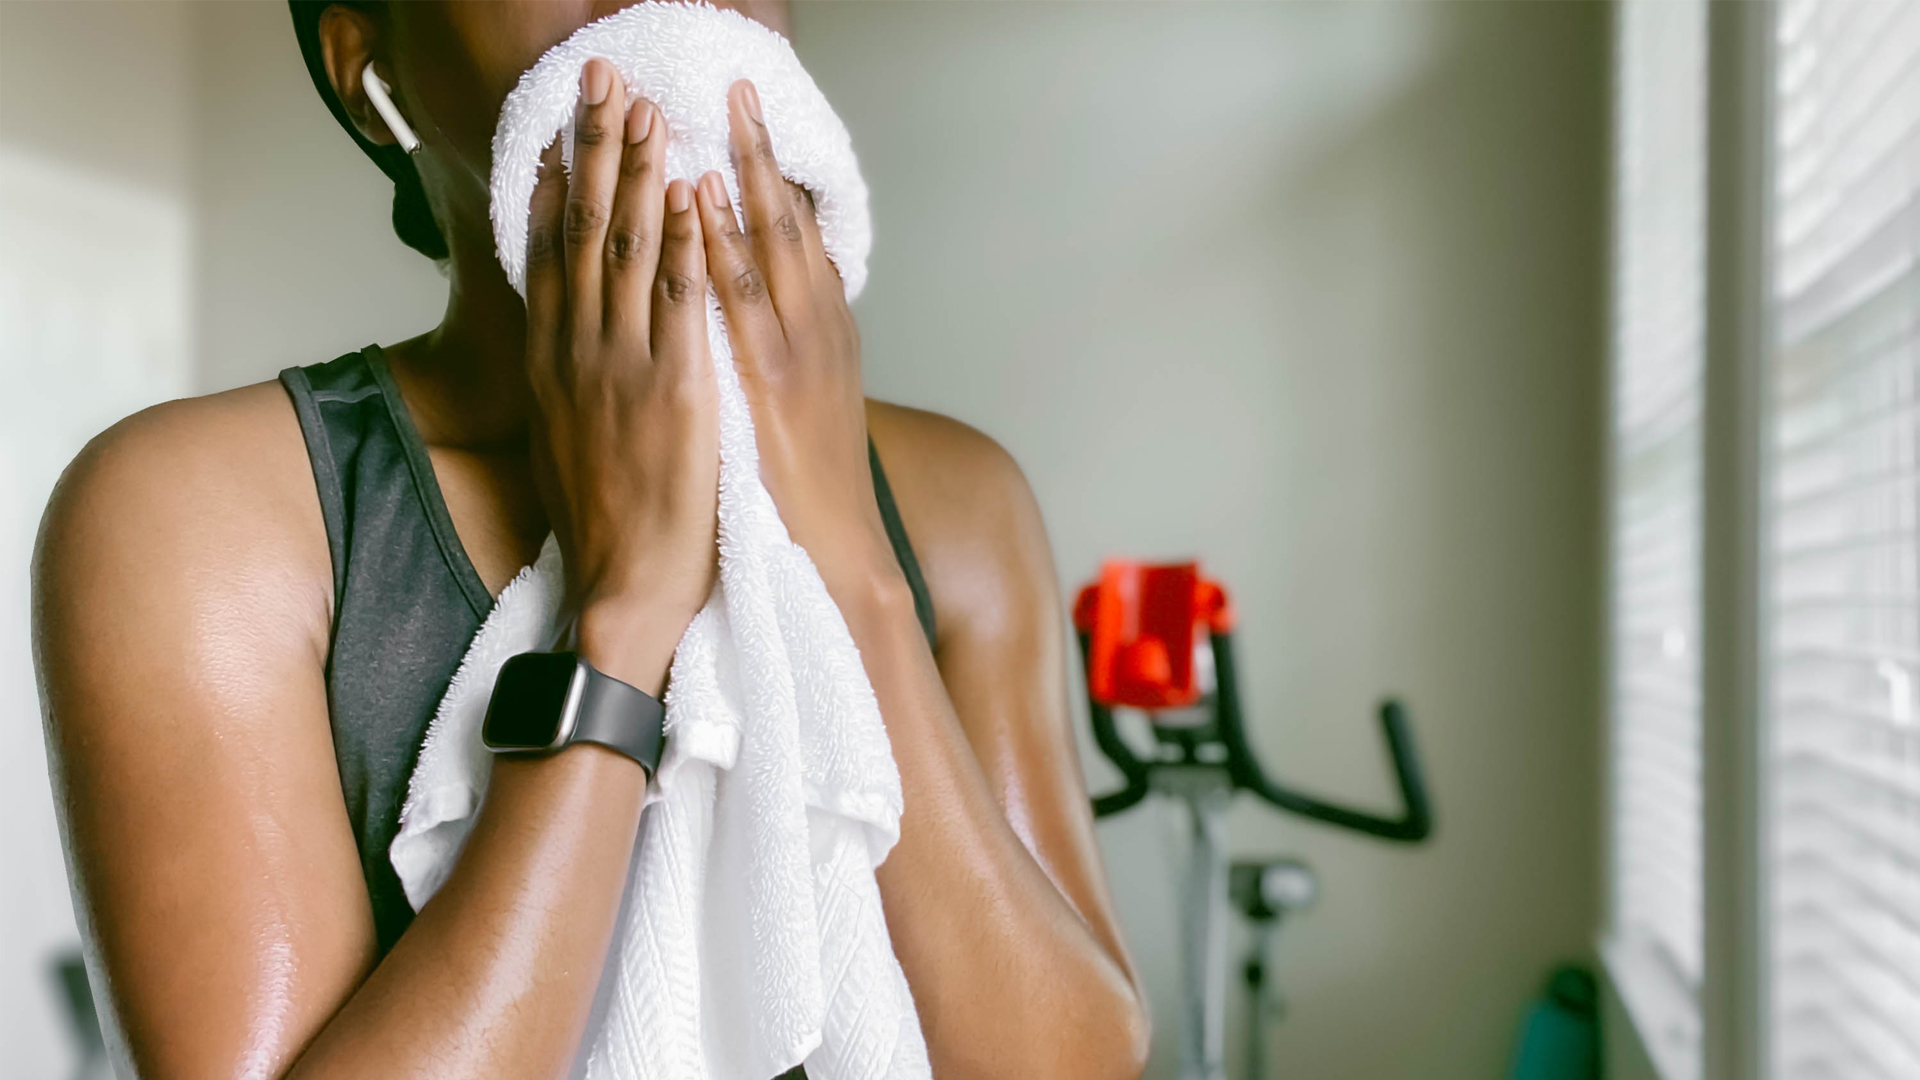 Image of a woman after a workout on an exercise bike